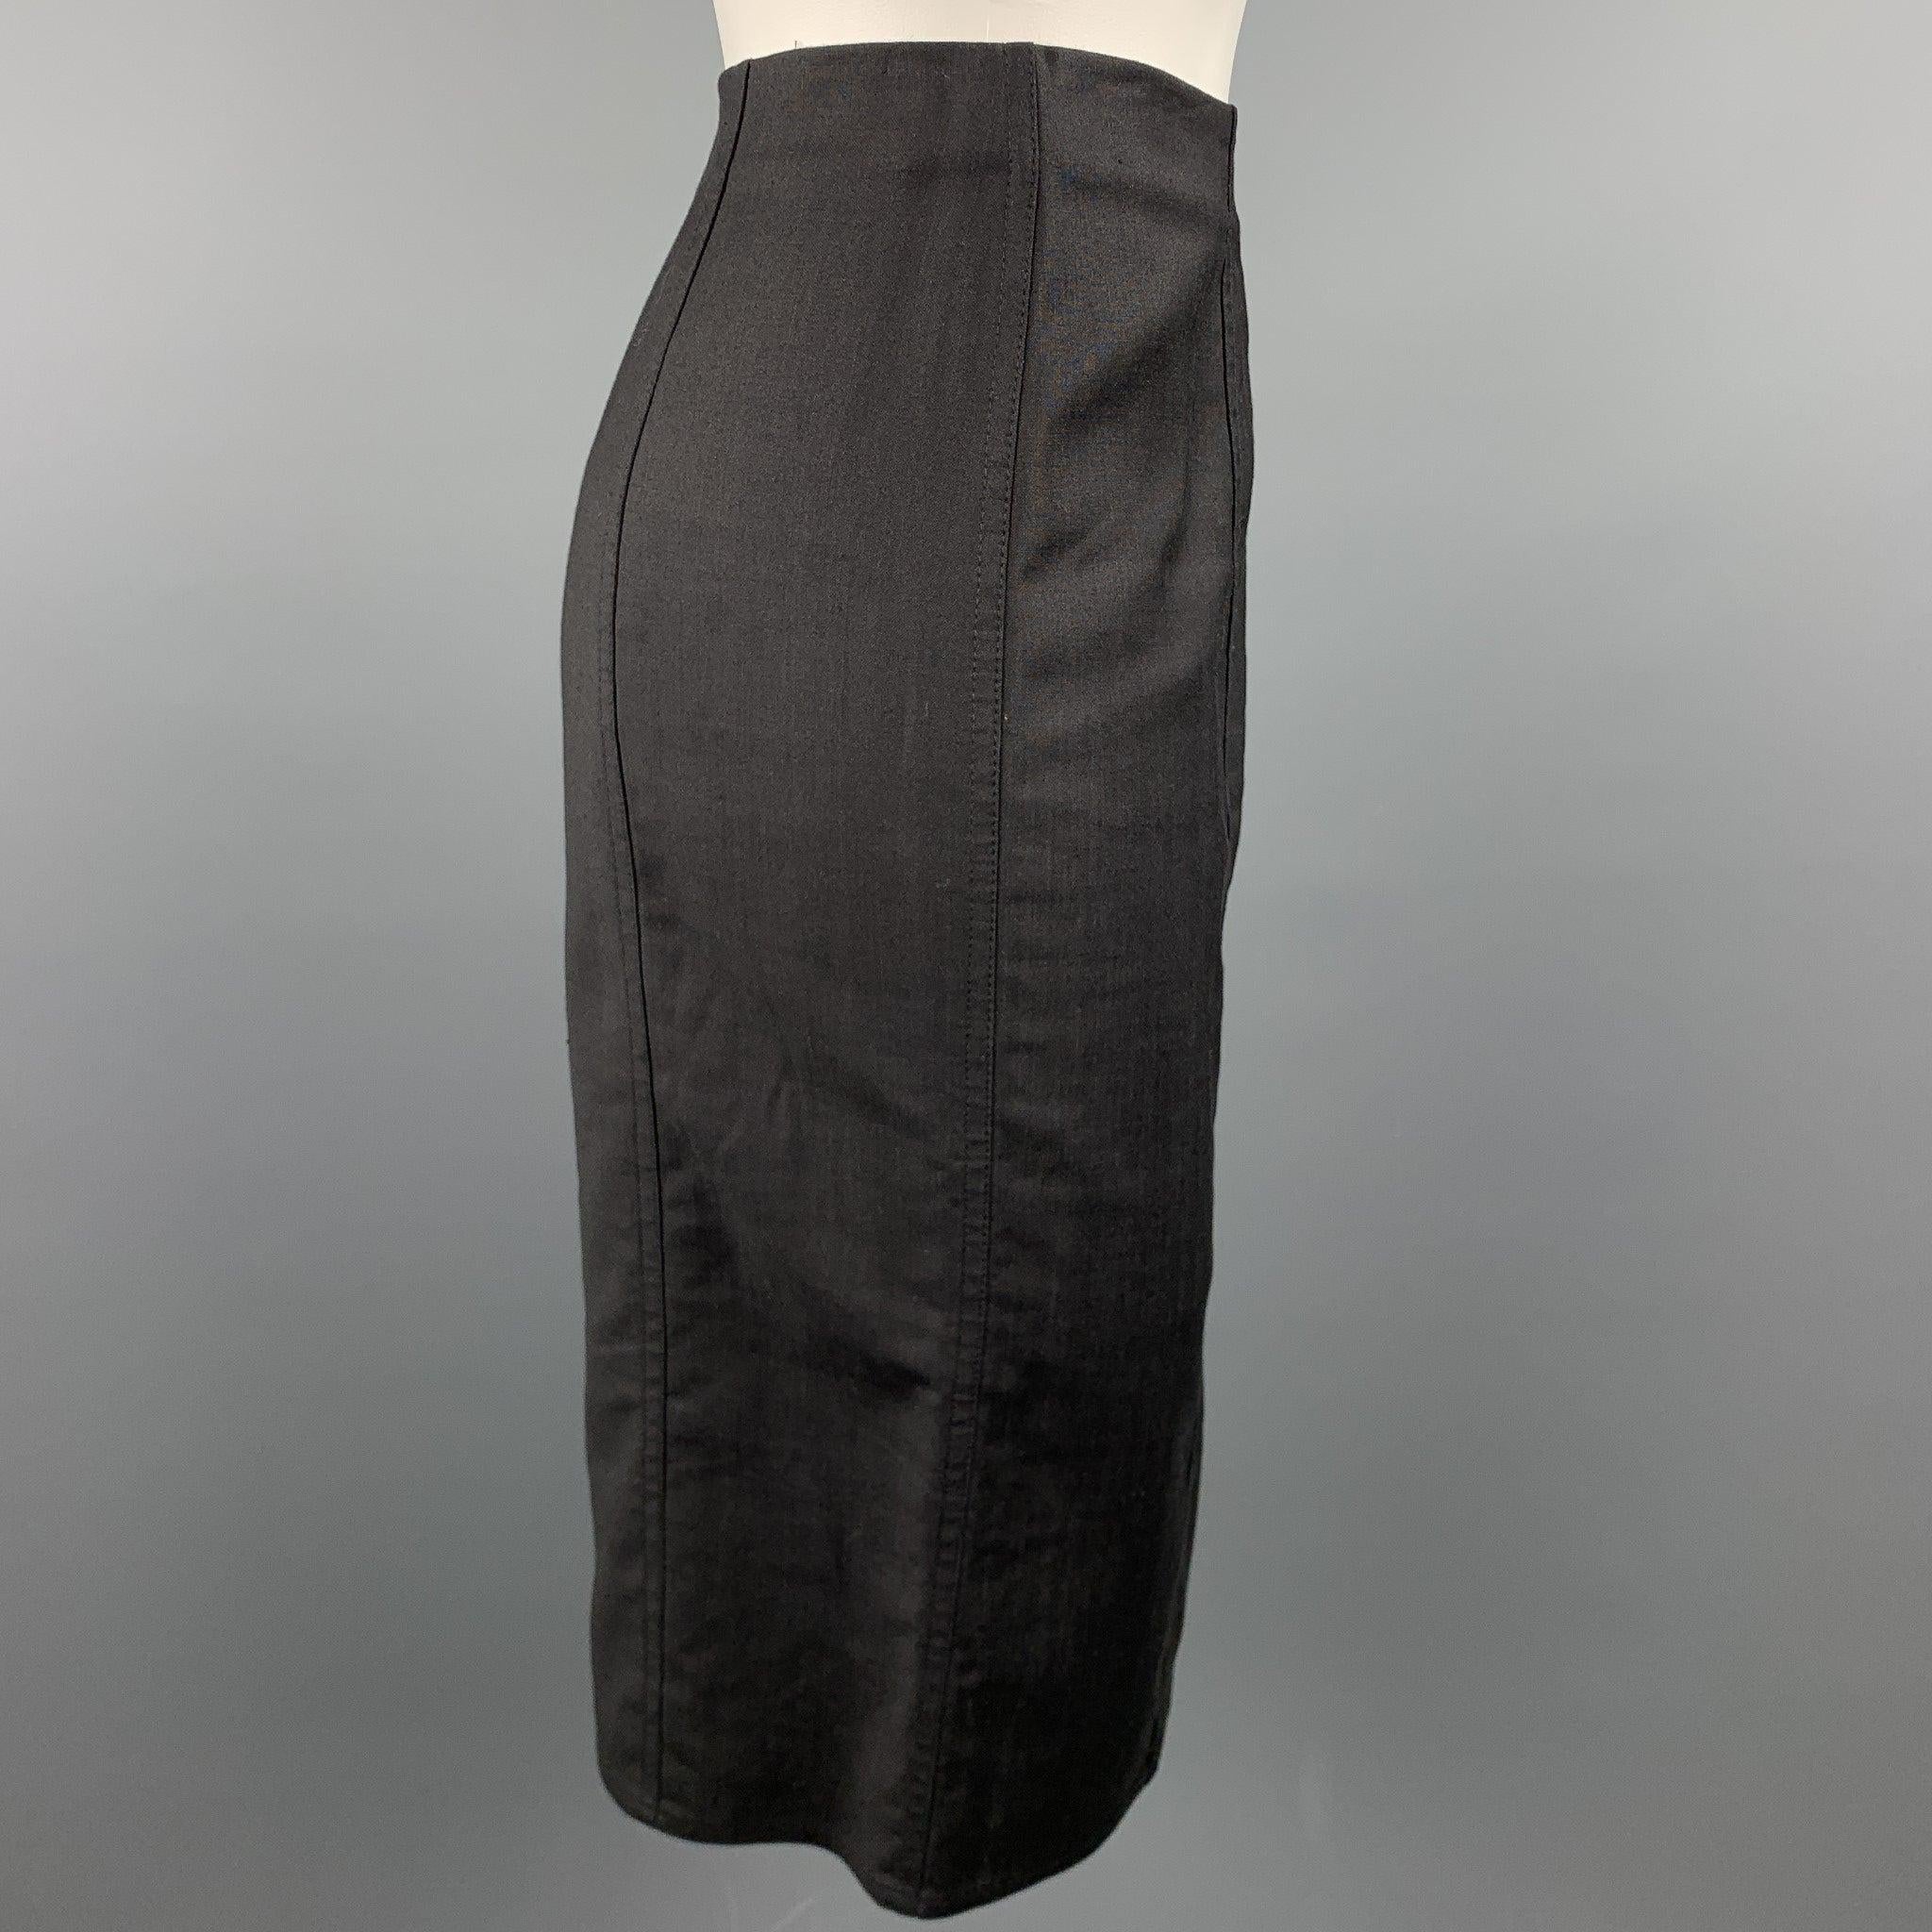 Vintage 2002/2003 CHRISTIAN DIOR BOUTIQUE by John Galliano skirt comes in a black viscose blend featuring a pencil style, front vent, and a side zipper closure. Made in France.Very Good
Pre-Owned Condition. 

Marked:   F 38 / GB 10 / D 36 / USA